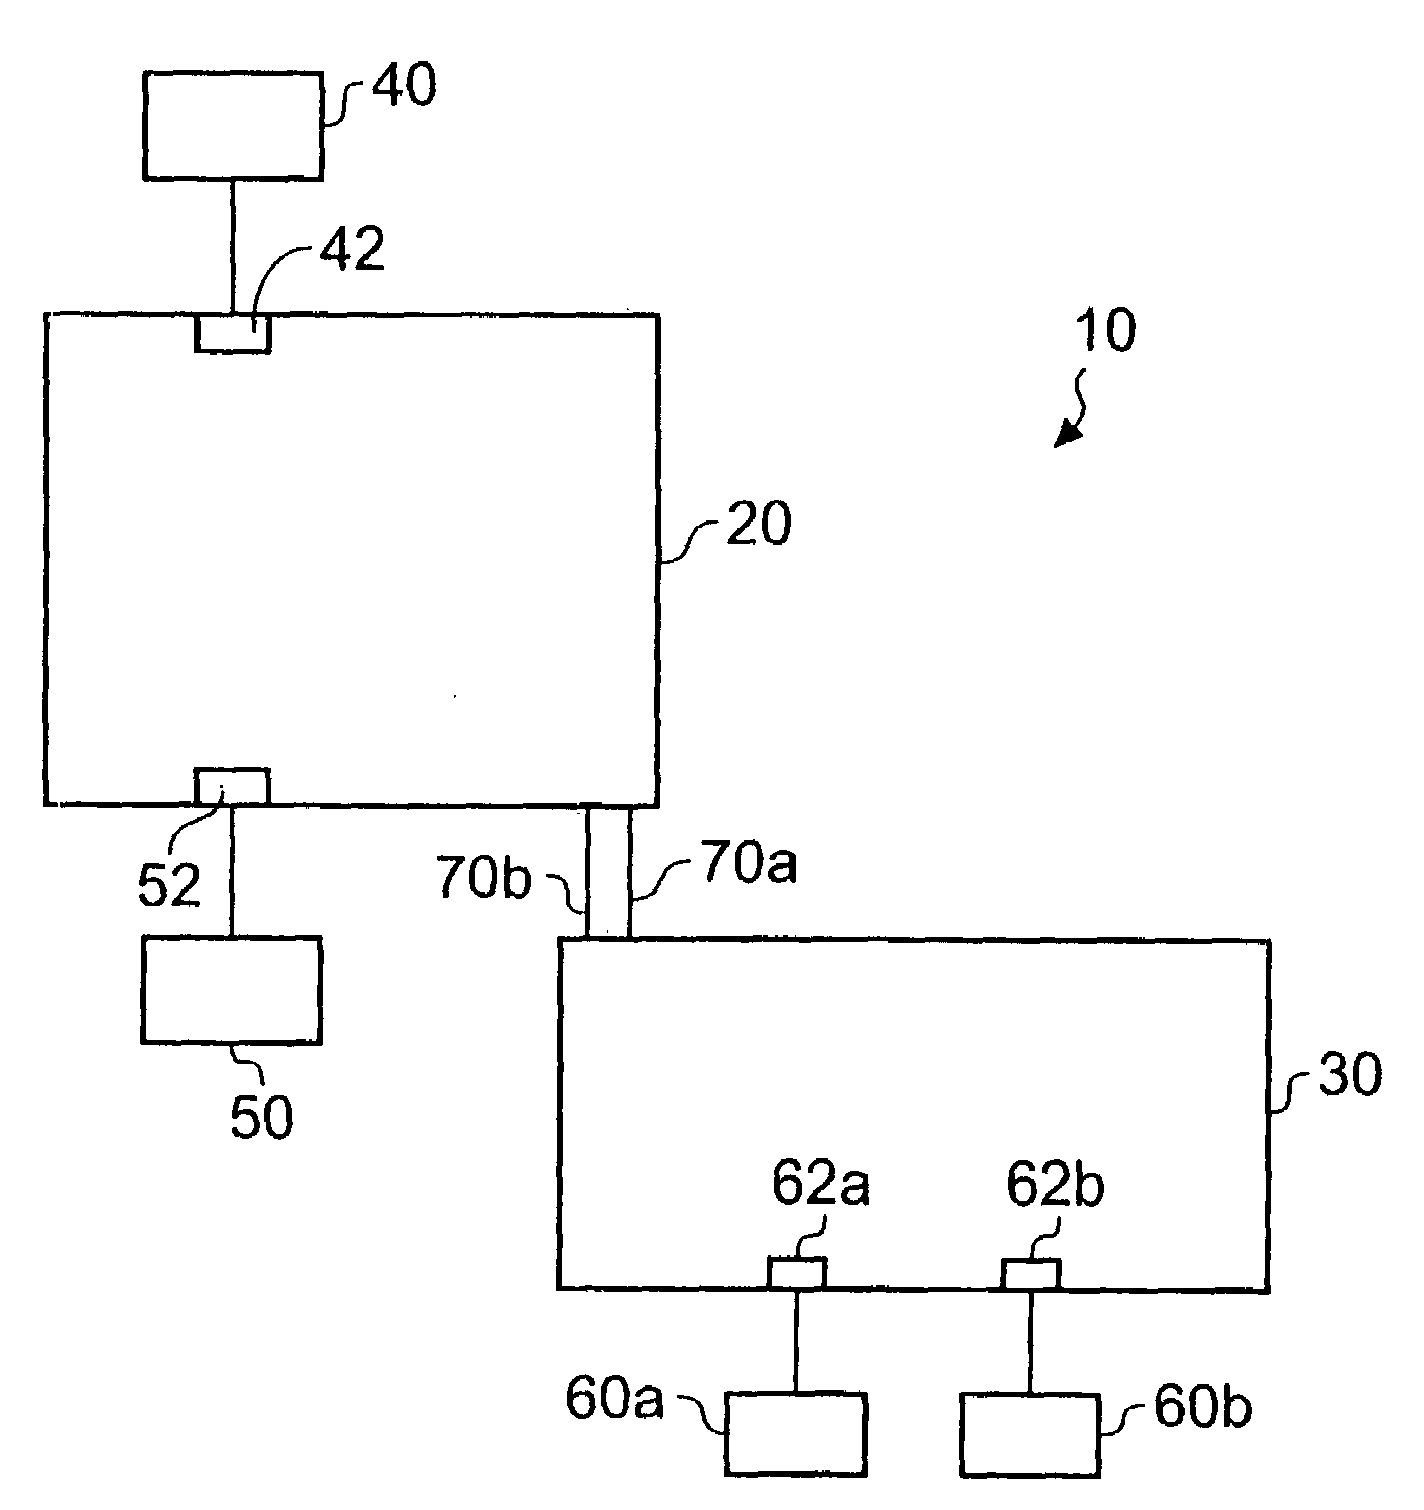 Interconnecting initiator devices and recipient devices